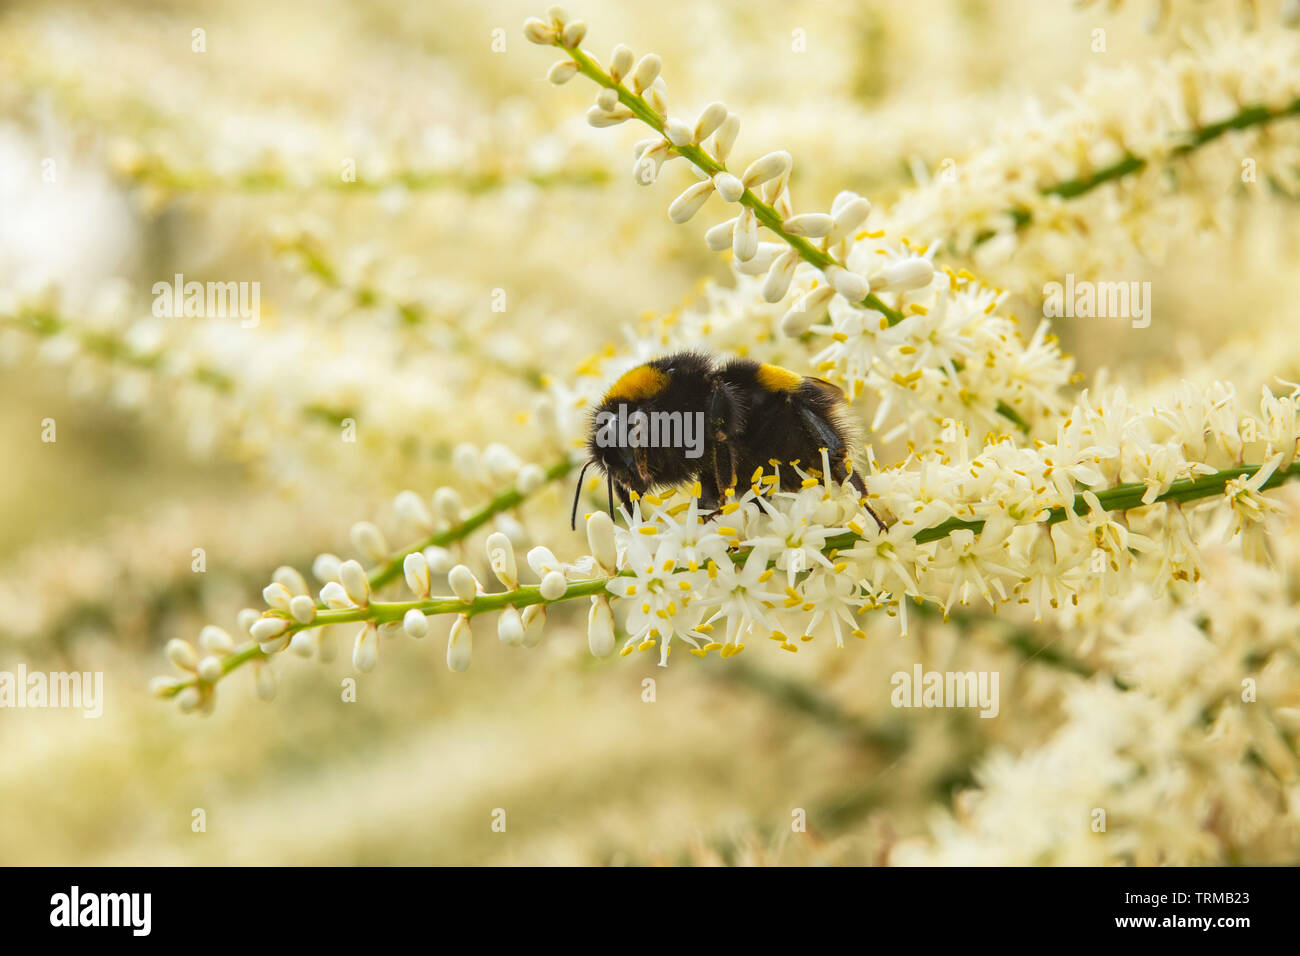 A bee feasts on the pollen and nectar from the panicle flowers of cordyline australis, in a Devon garden. Stock Photo